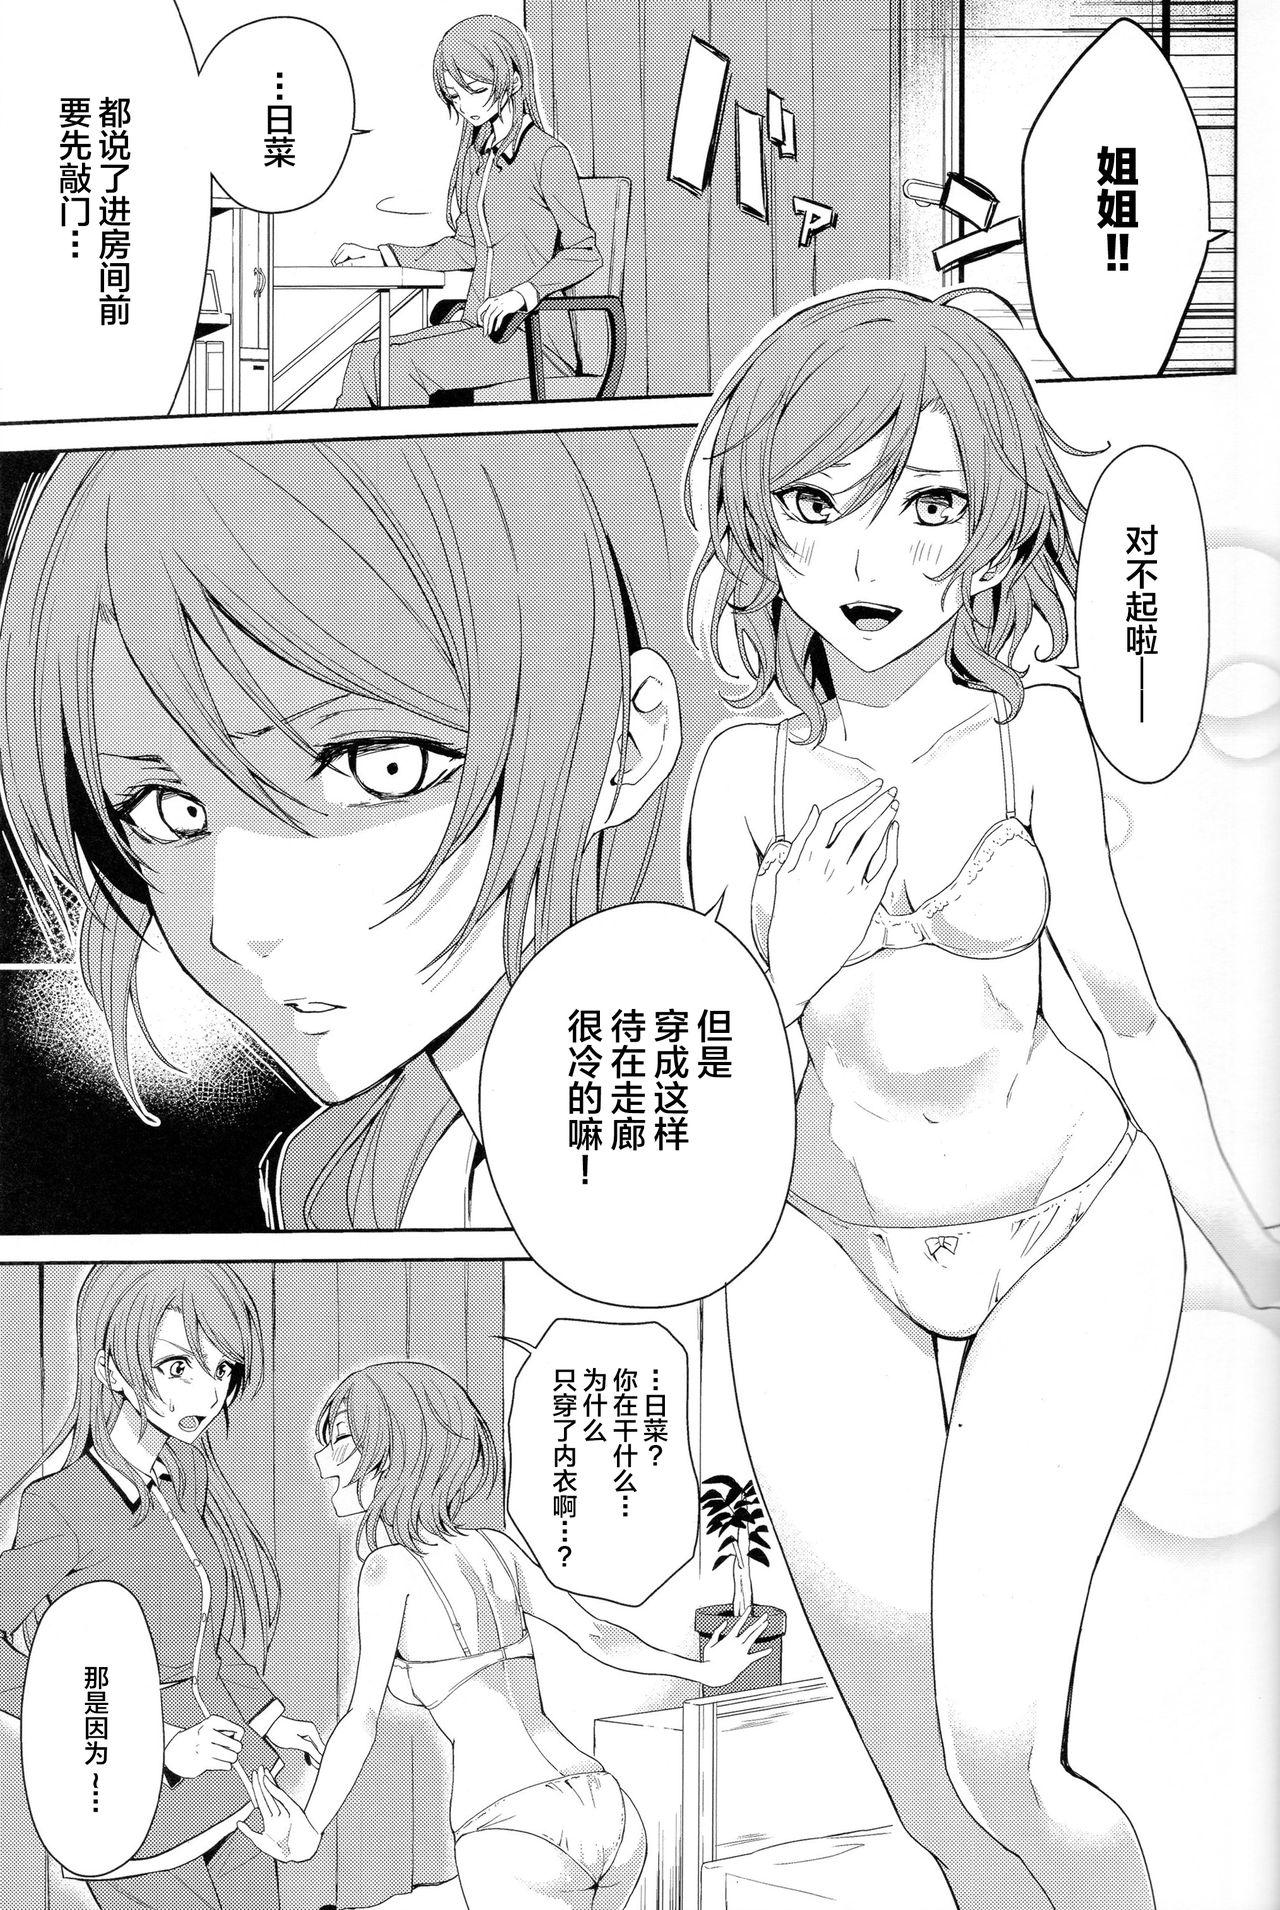 Whore Onee-chan to! - Bang dream Polla - Page 2